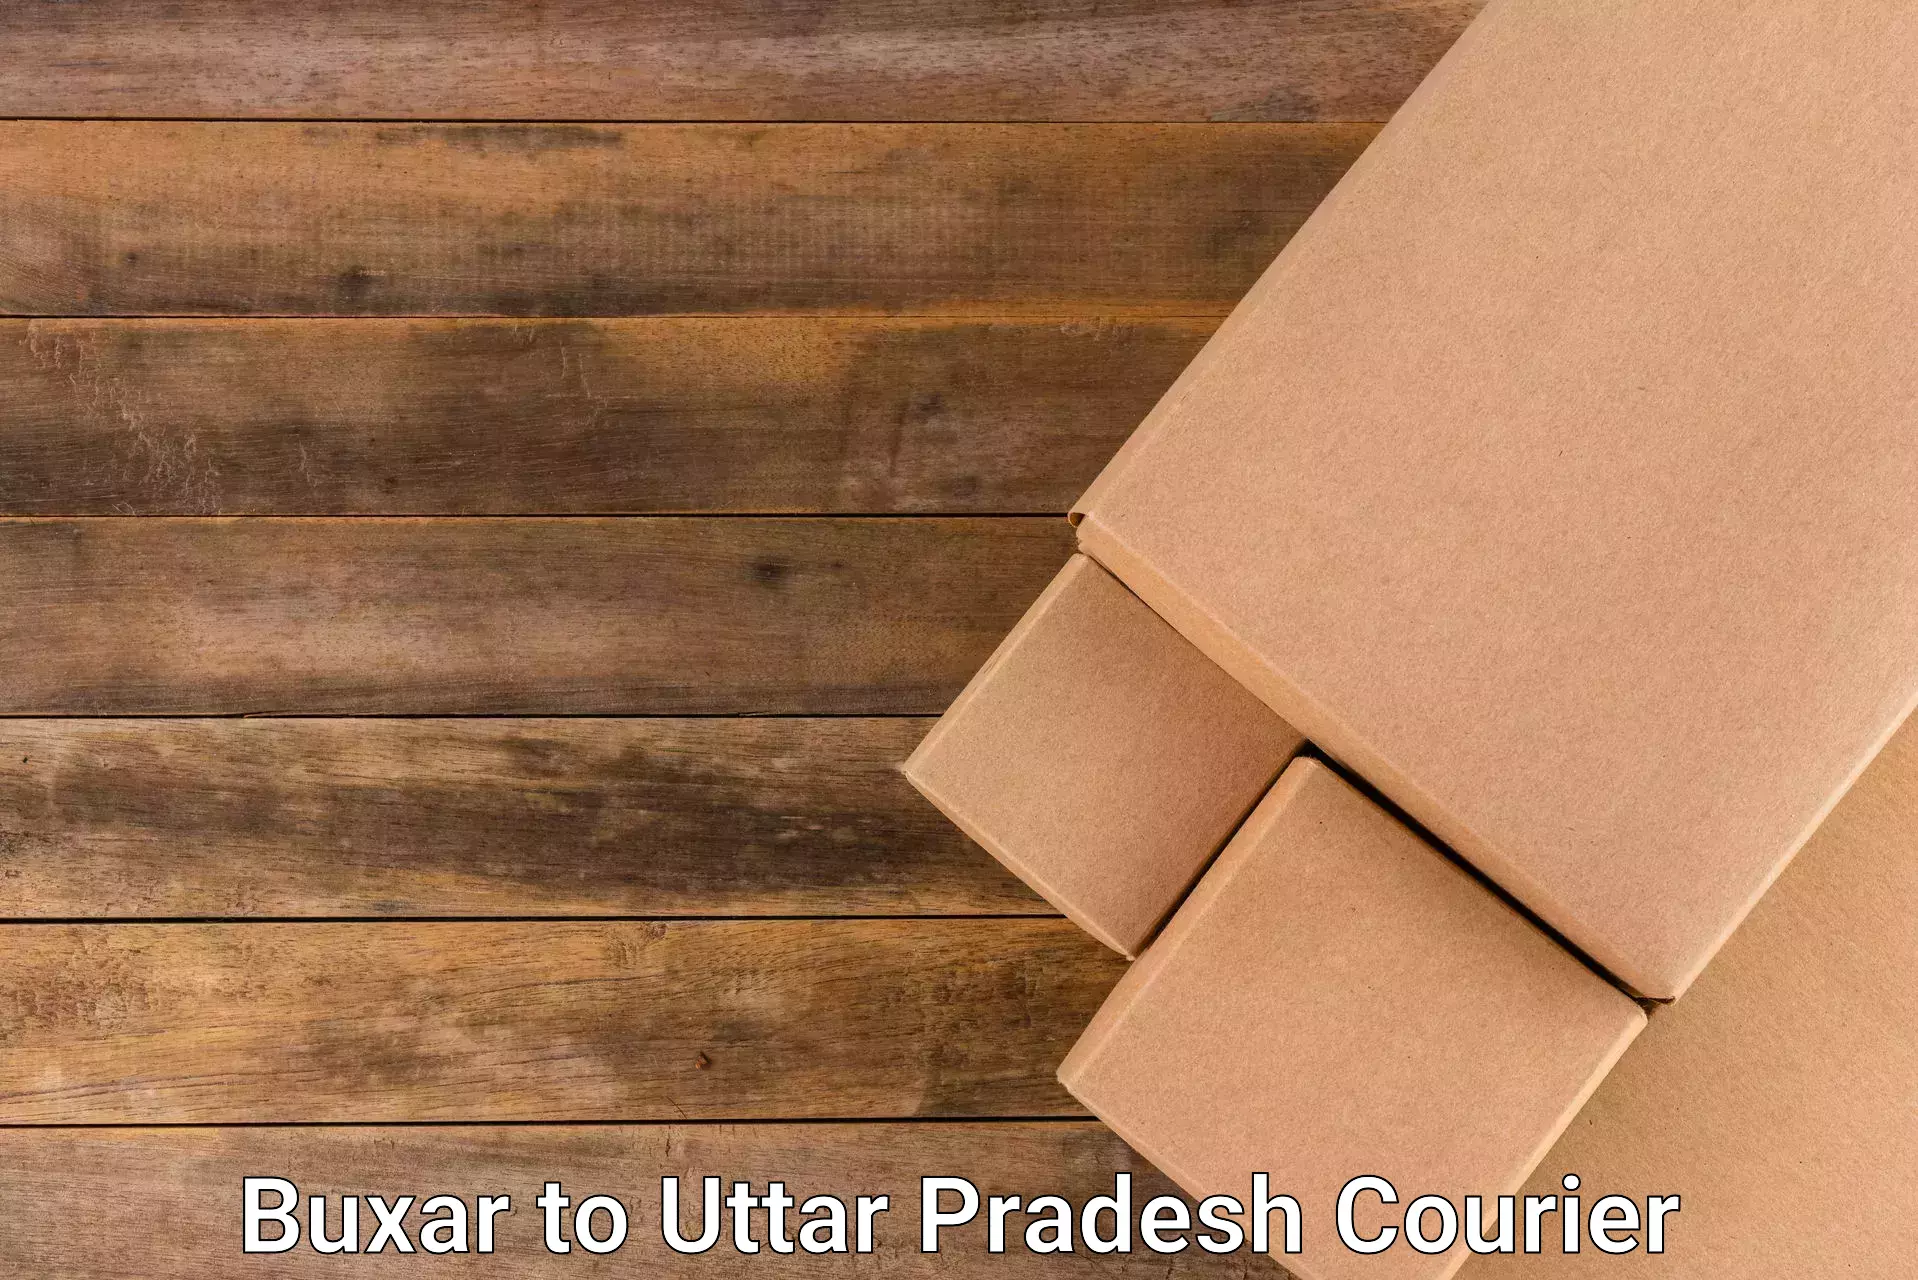 End-to-end delivery Buxar to Dadri